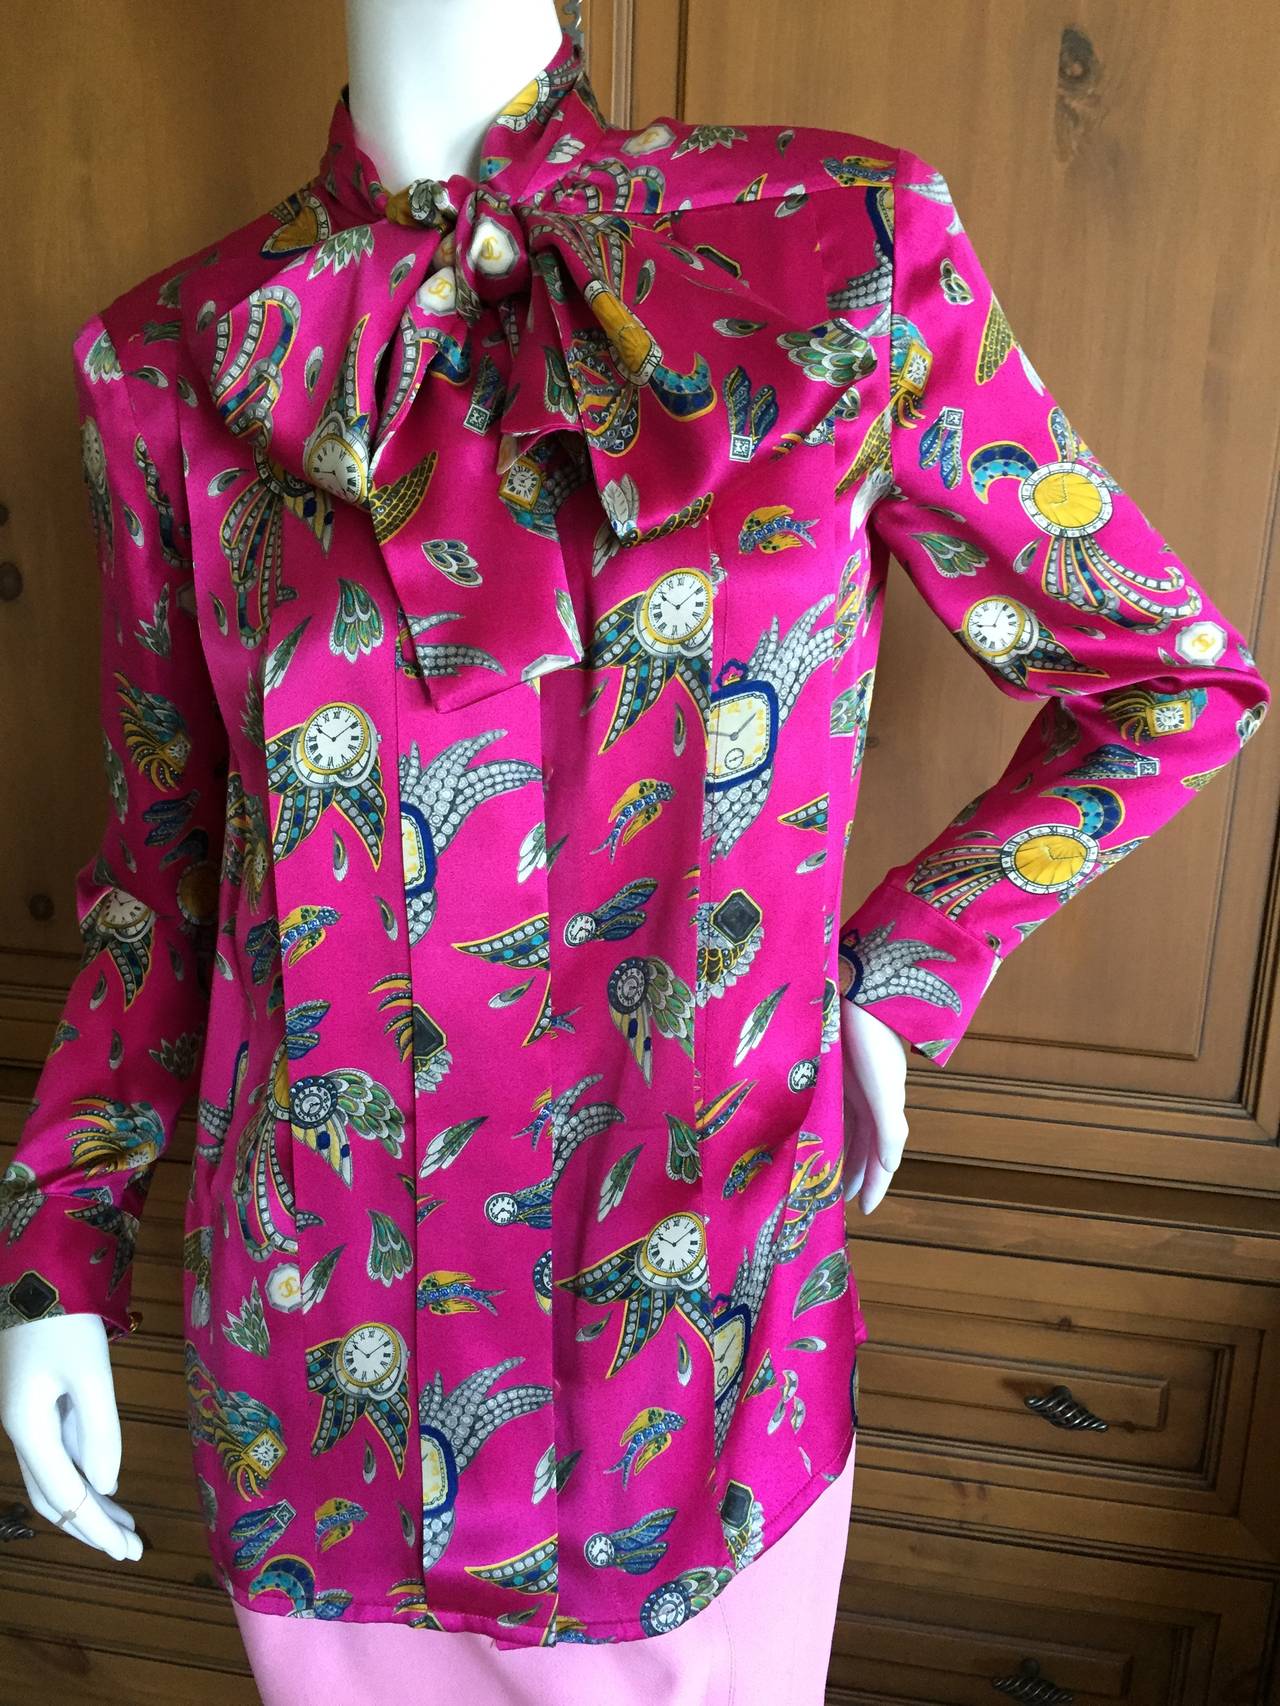 Chanel Vintage Silk Winged Jewel Blouse w Pussycat Bow.
Deep pleats and the iconic jeweled print from Karl Lagerfeld circa 1984